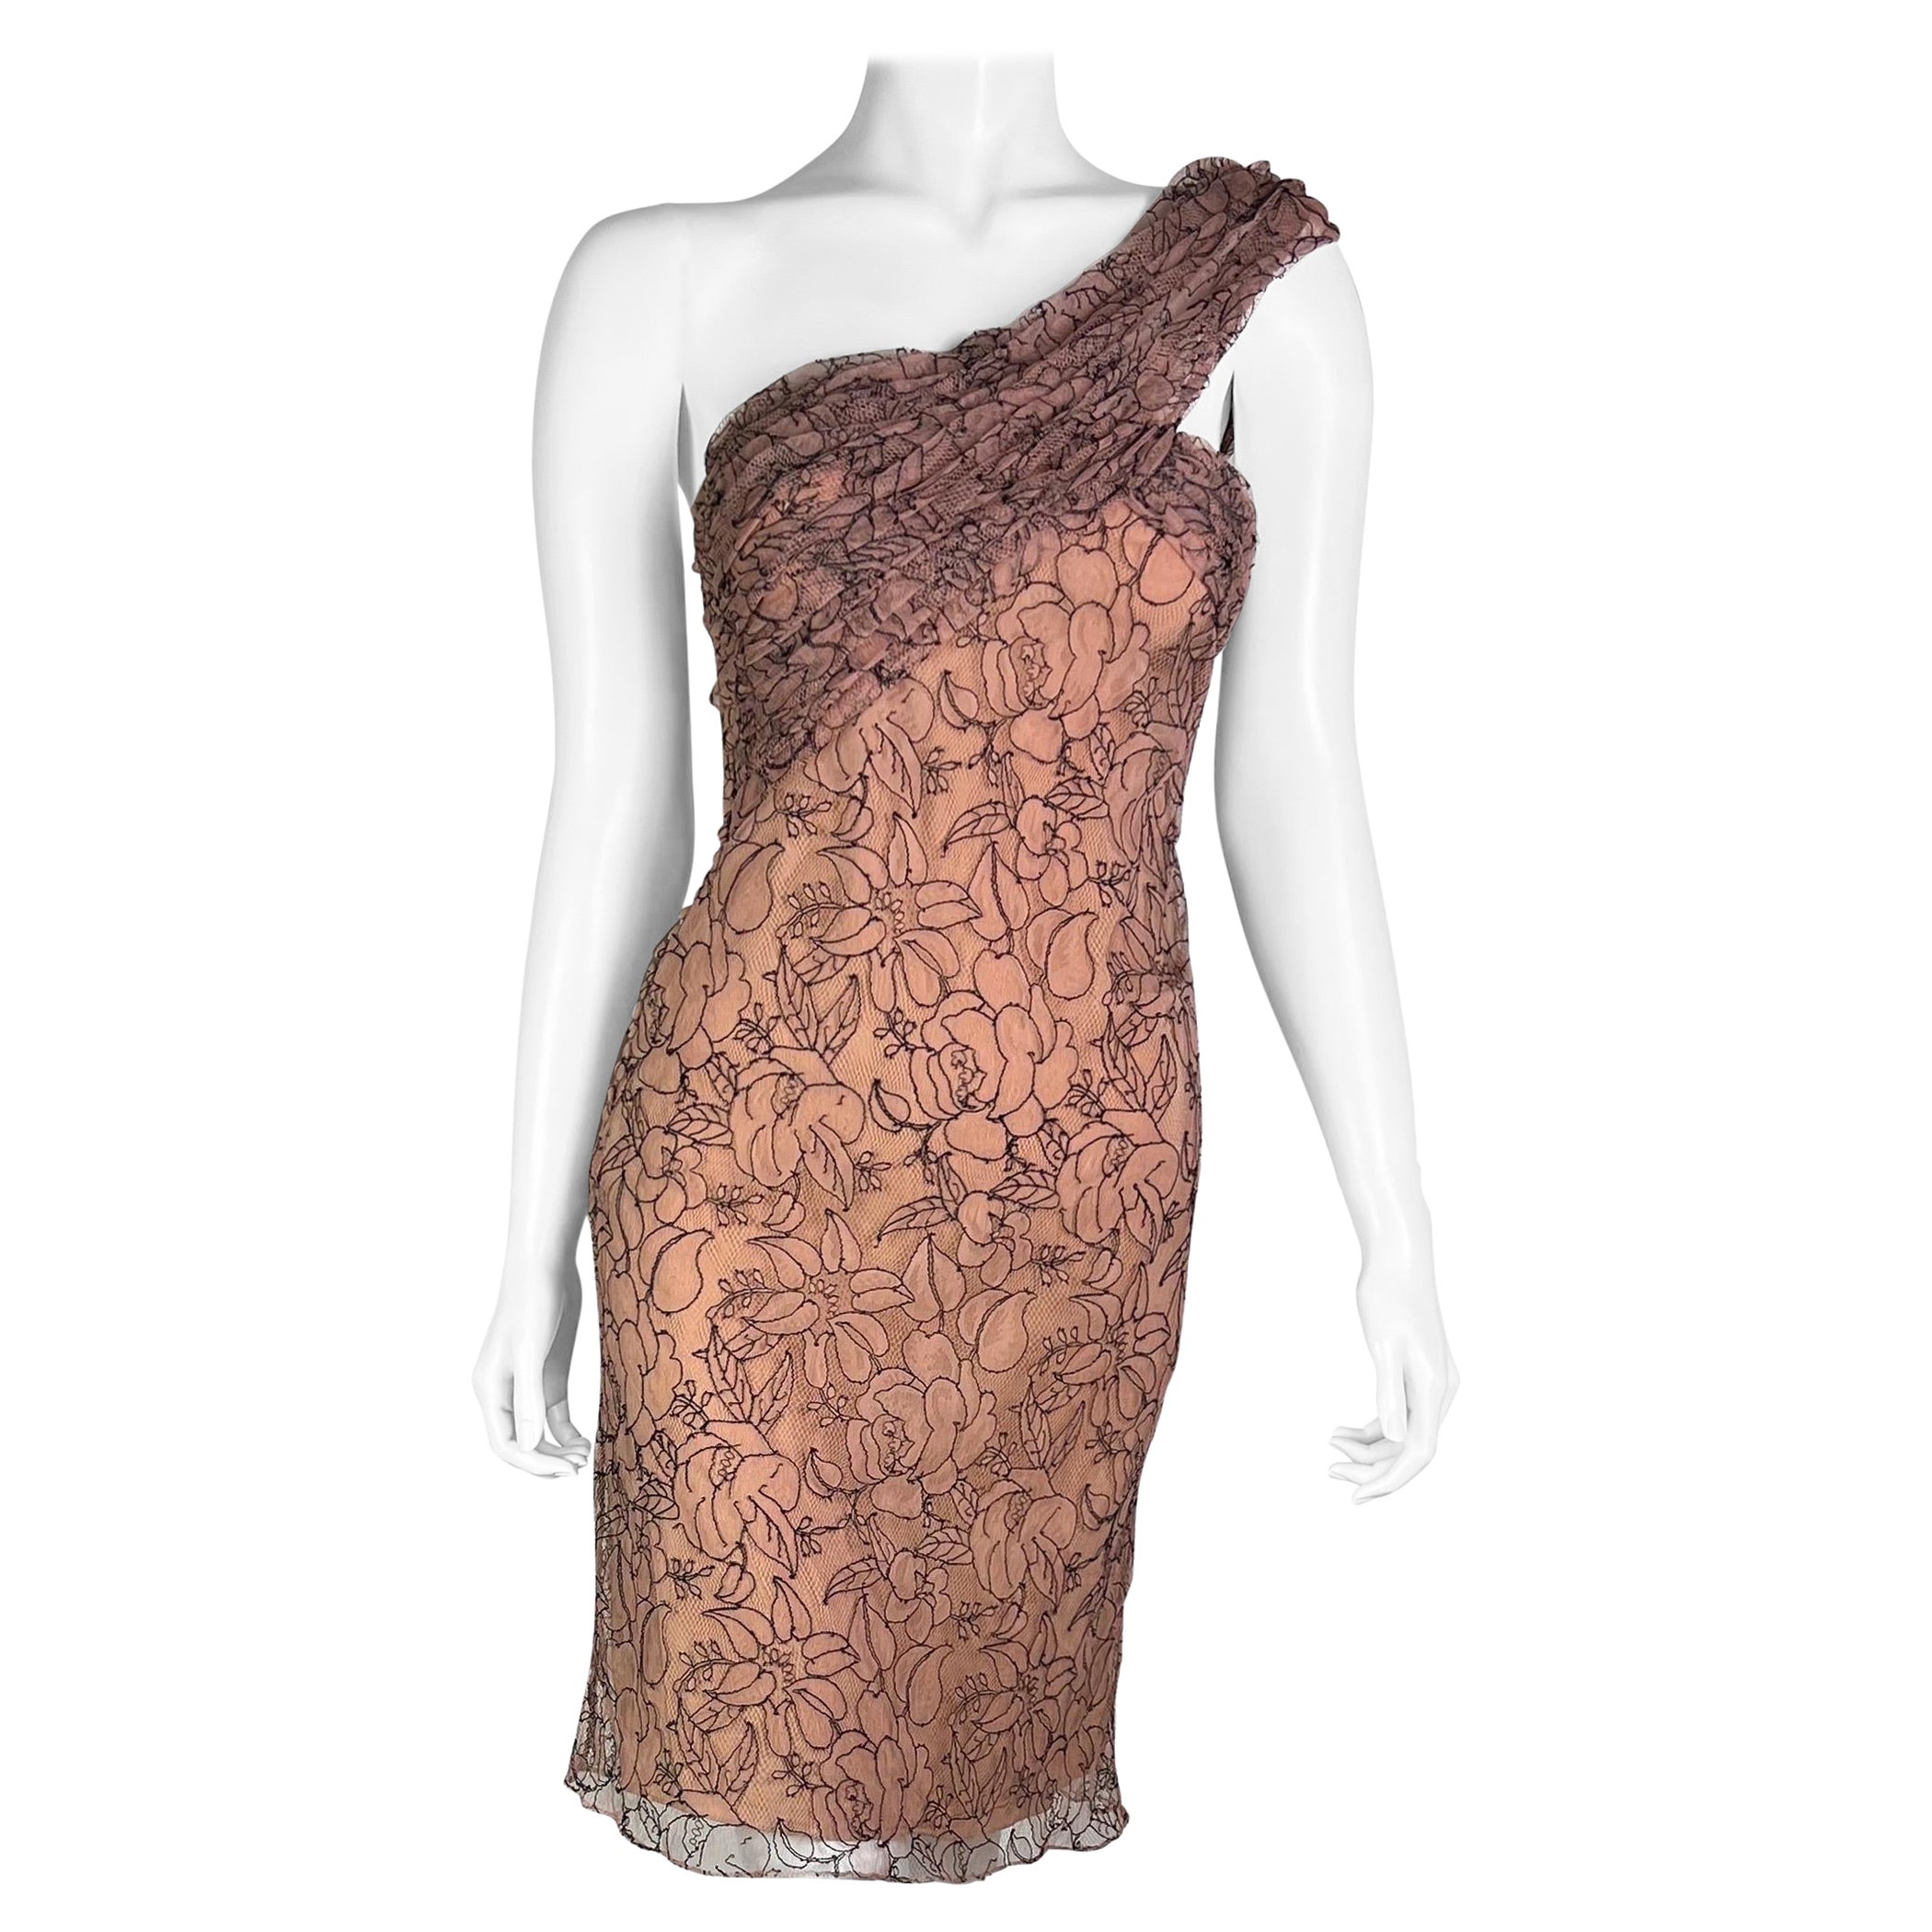  Spring 2006 Dior by John Galliano Lace Dress For Sale